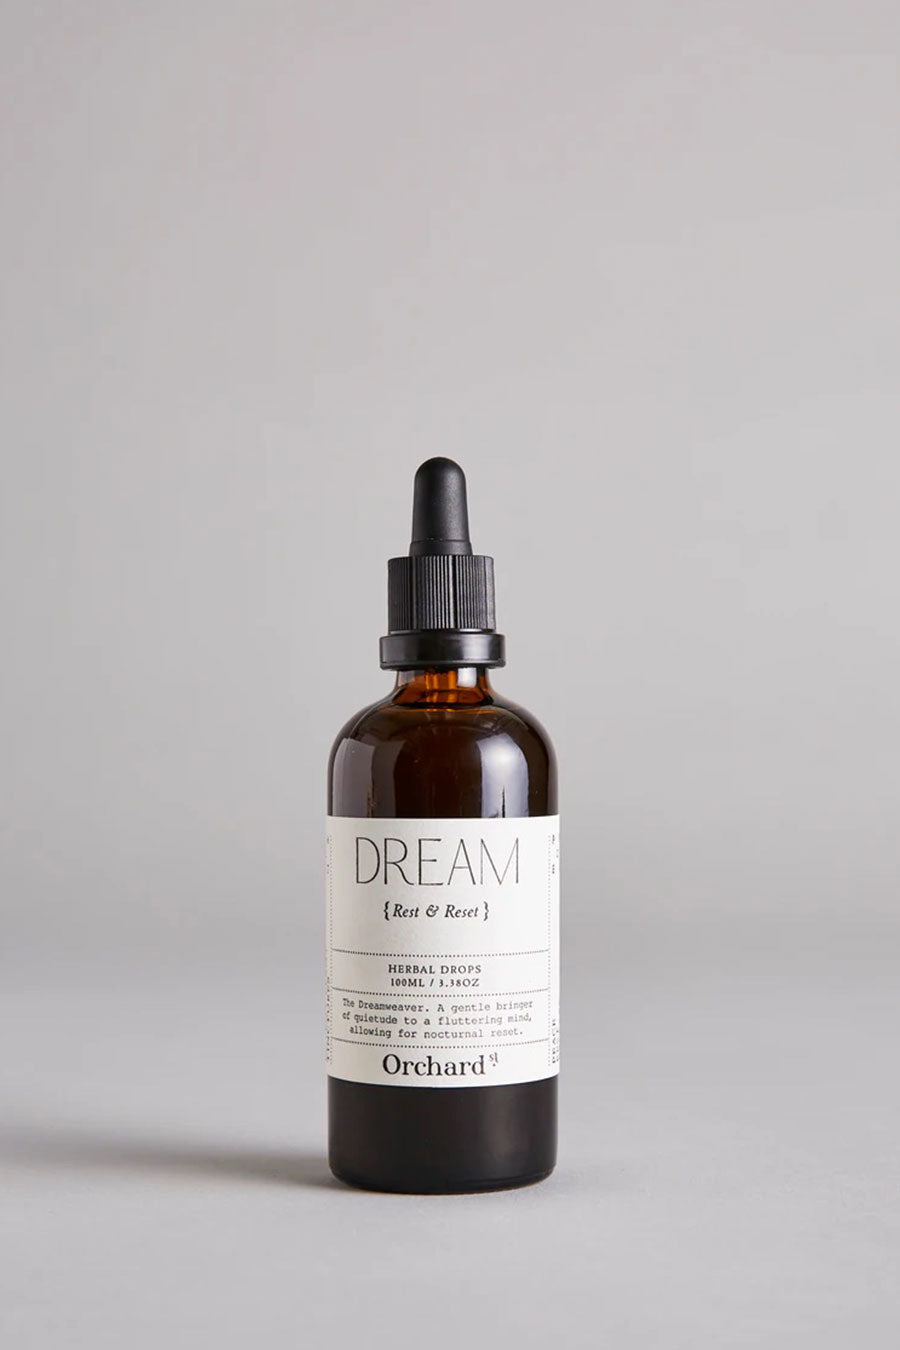 Orchard St Herbal Drops - Dream